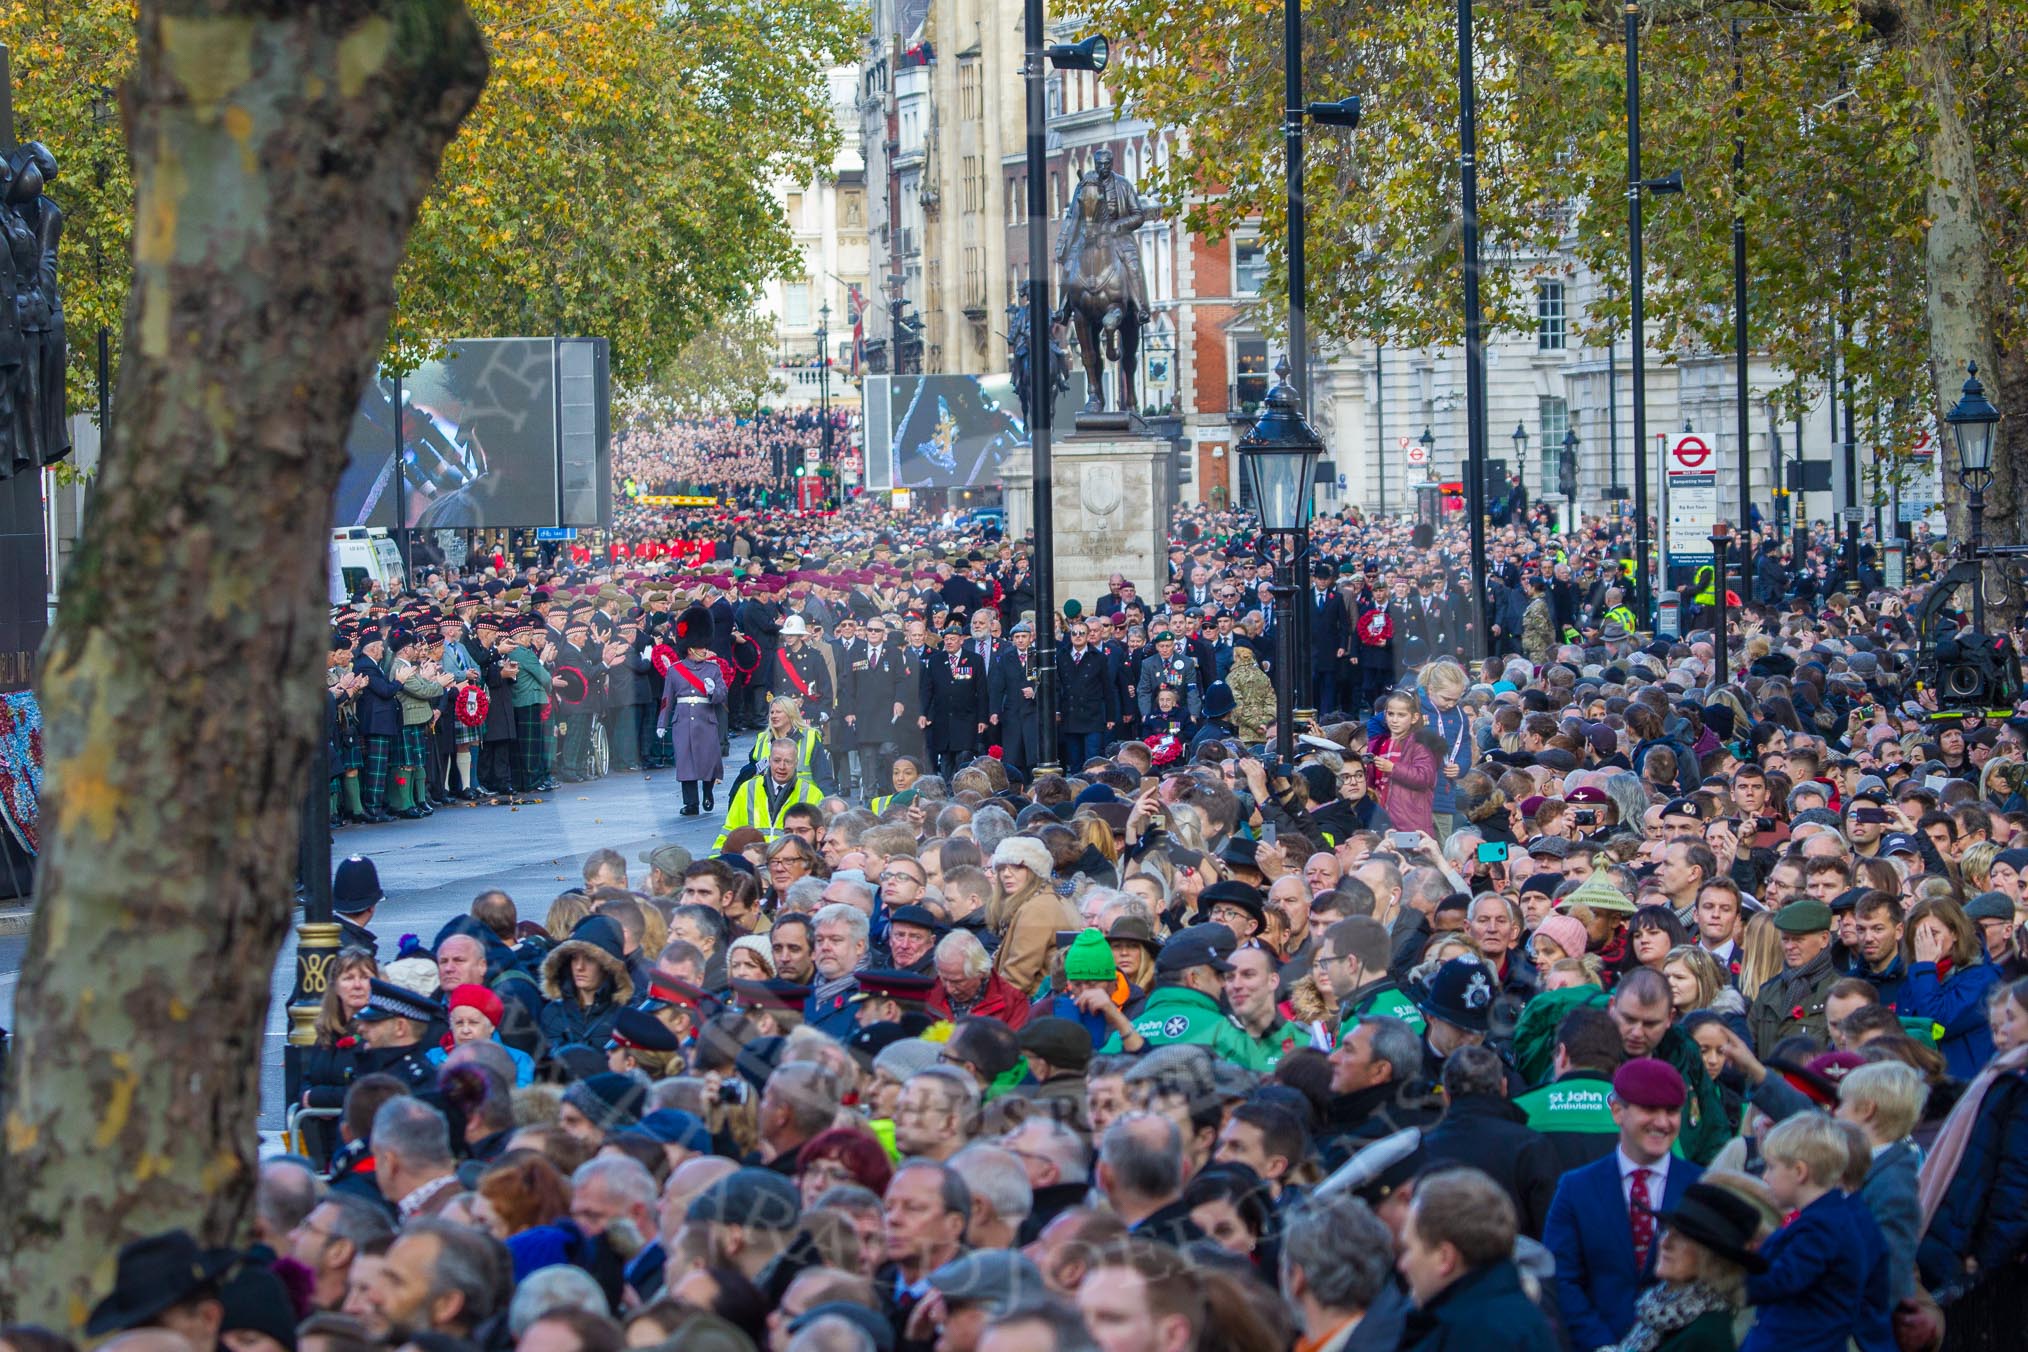 The build-up of the March Past is almost complete on Whitehall before the Remembrance Sunday Cenotaph Ceremony 2018 at Horse Guards Parade, Westminster, London, 11 November 2018, 10:41.